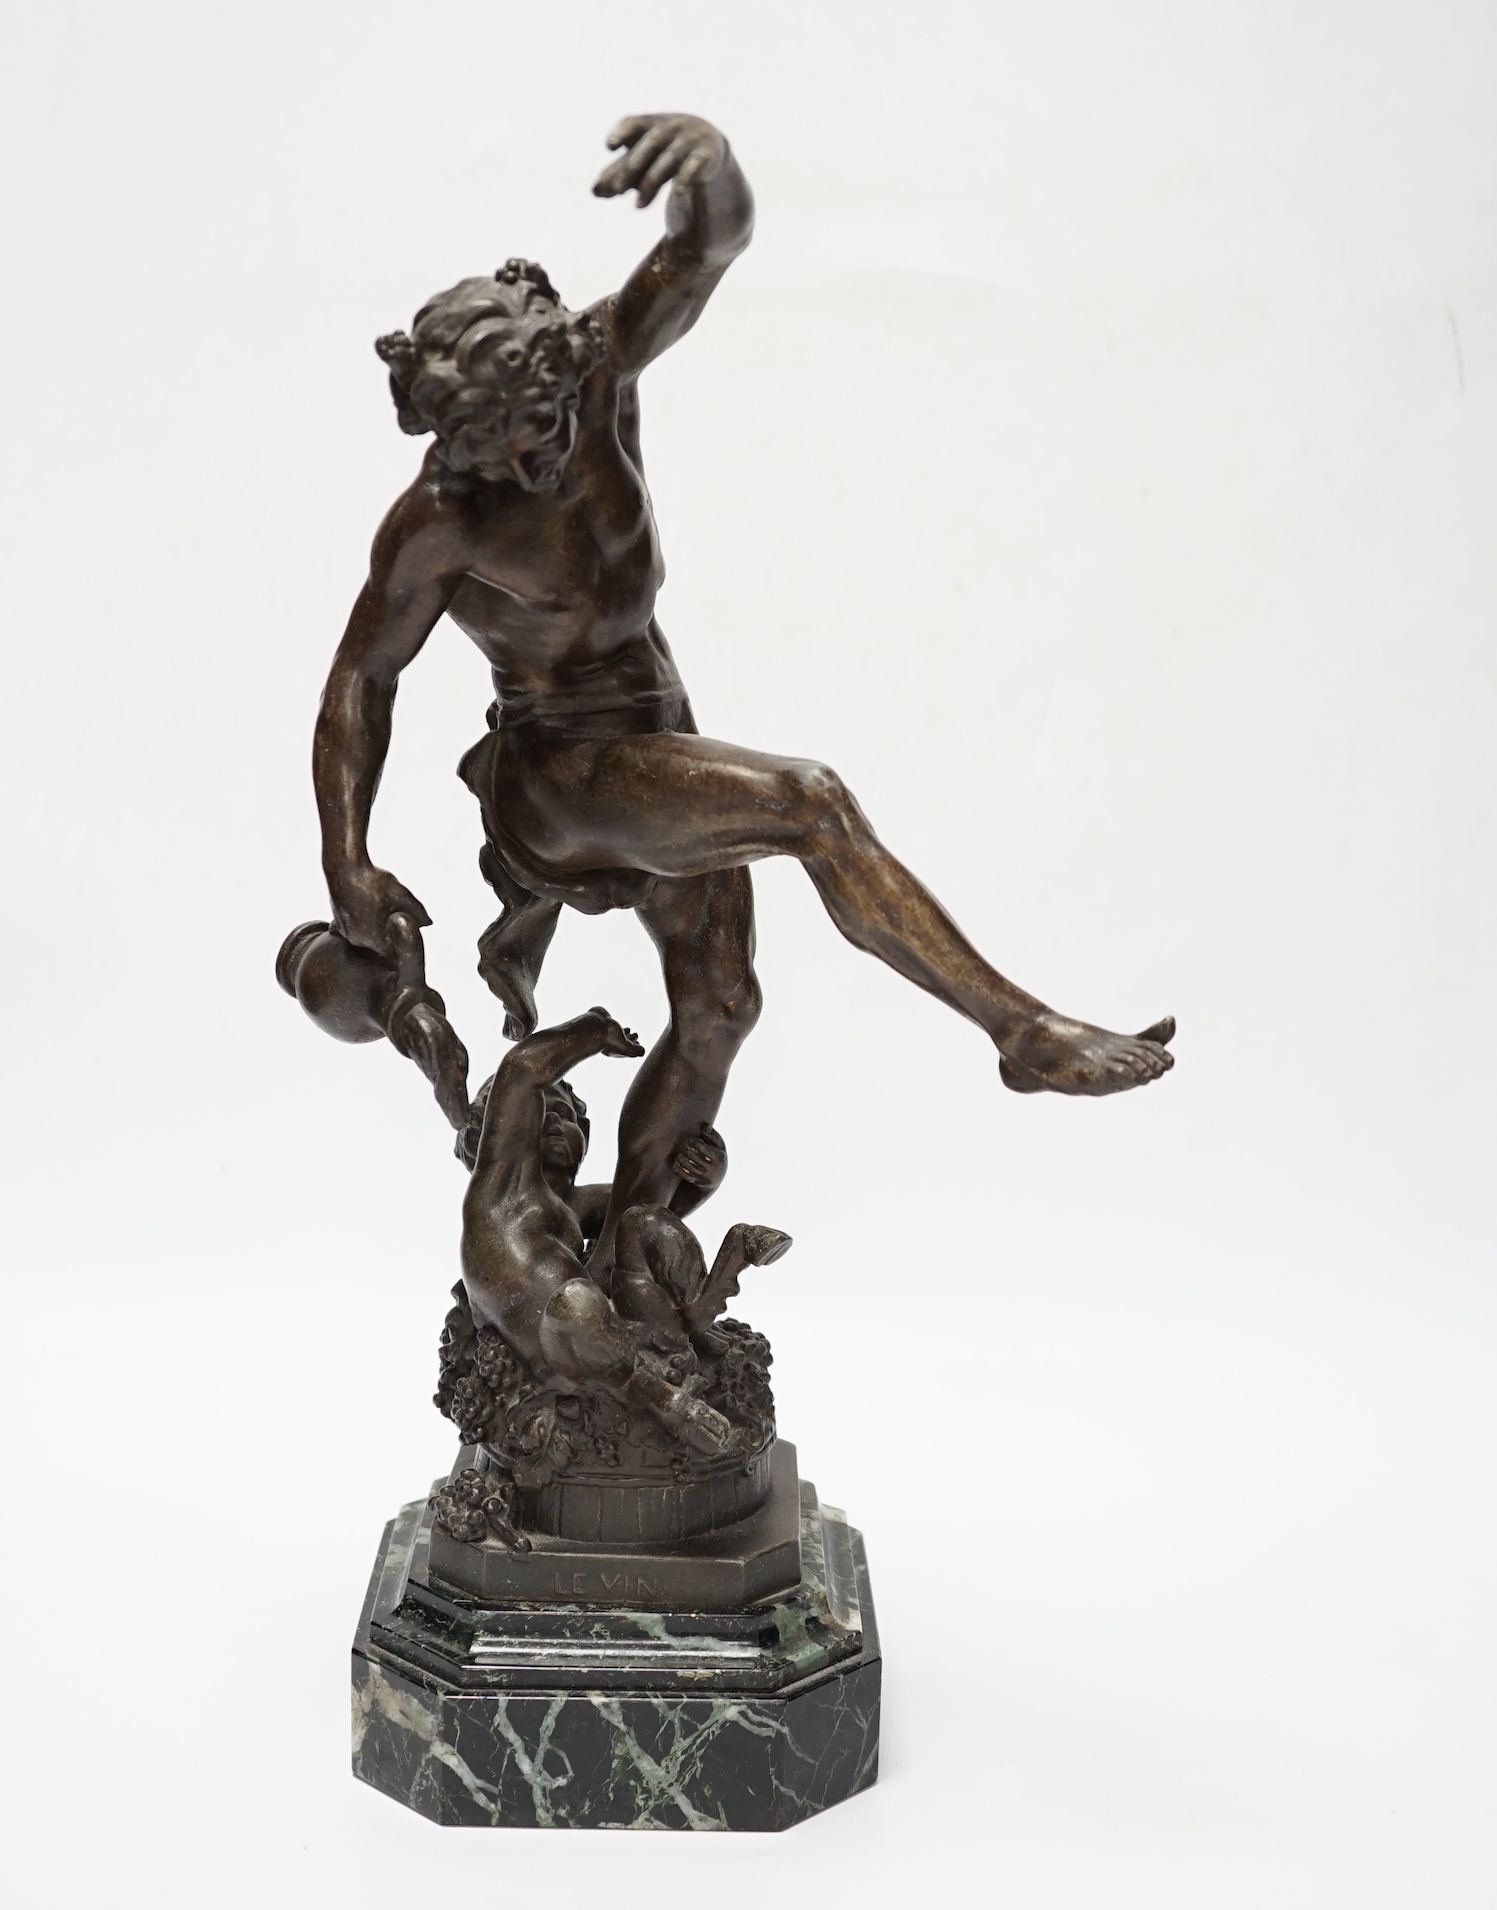 A bronzed spelter dancing figure of Bacchus - ‘Le Vin’, with a fawn and bunches of grapes, on a marble base, 36cm high